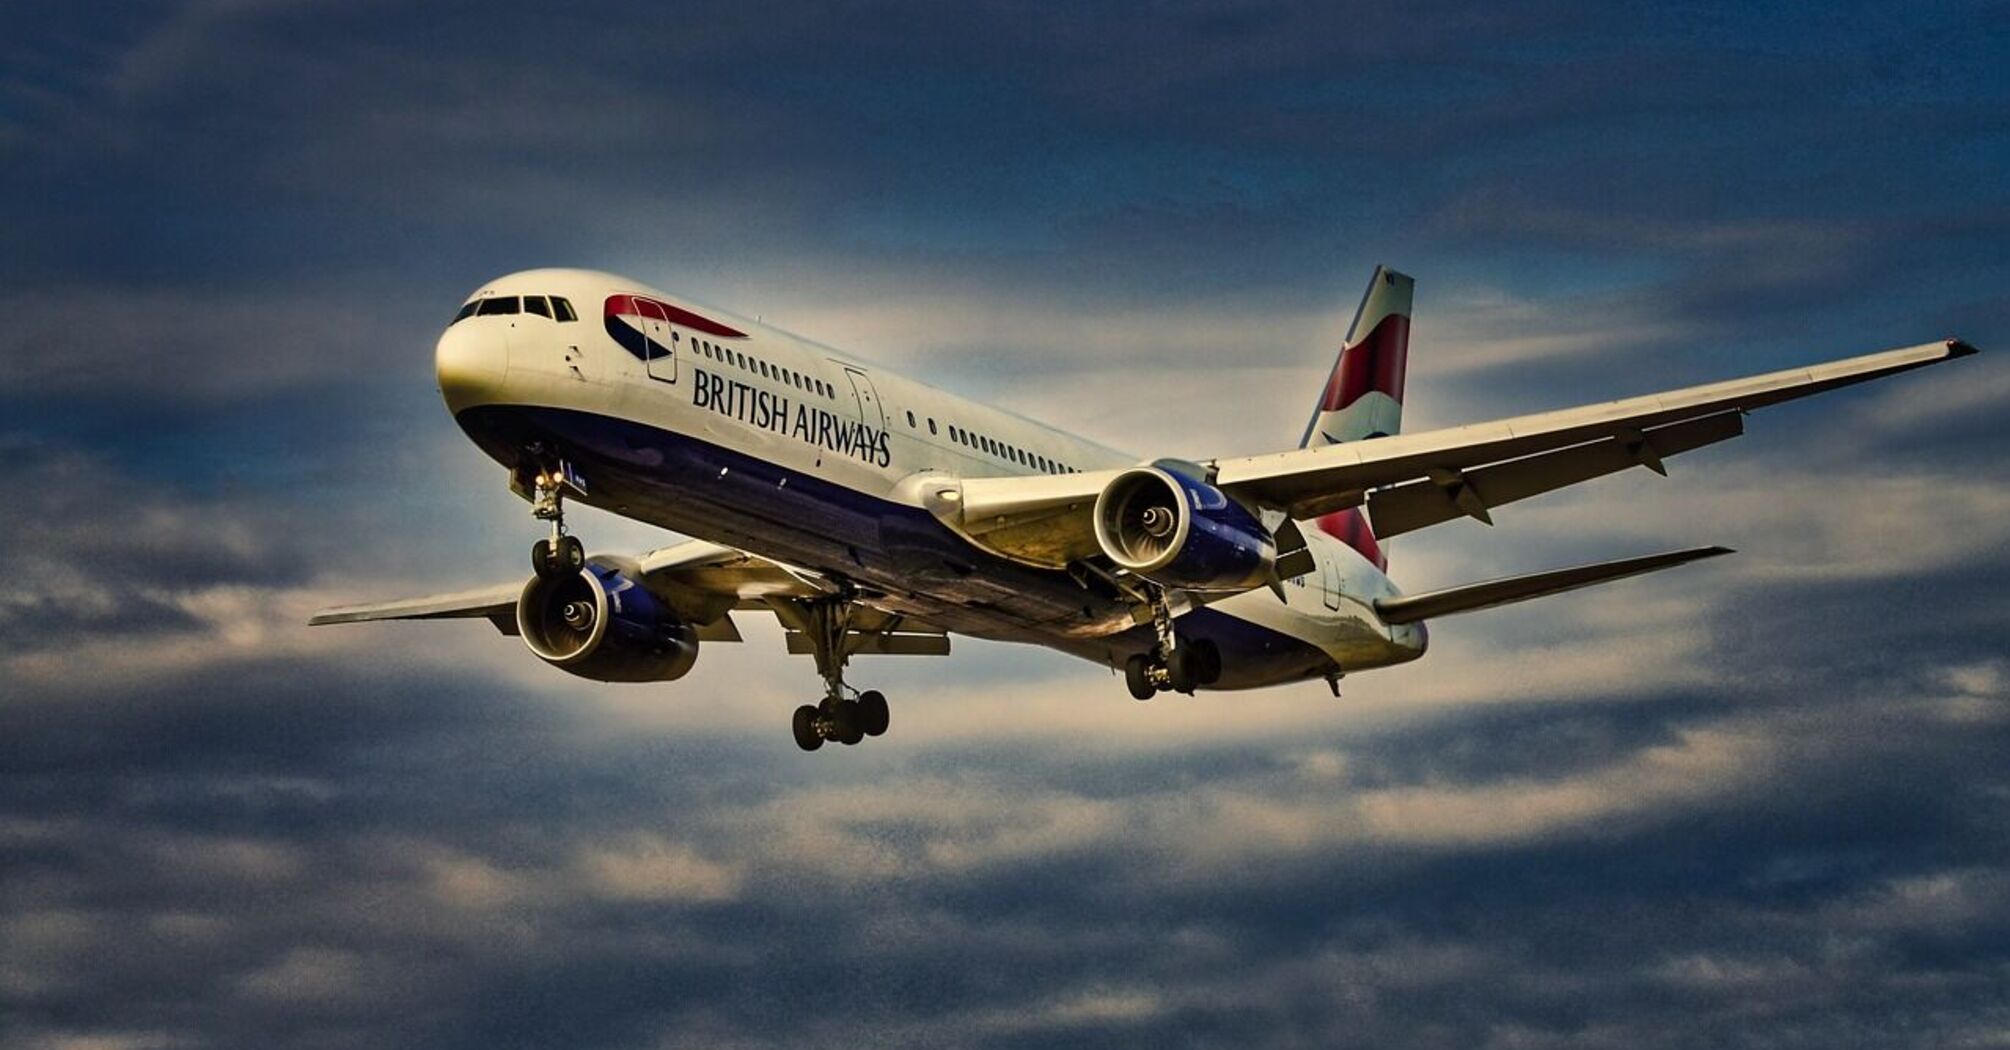 British Airways website goes down at the height of Isha storm